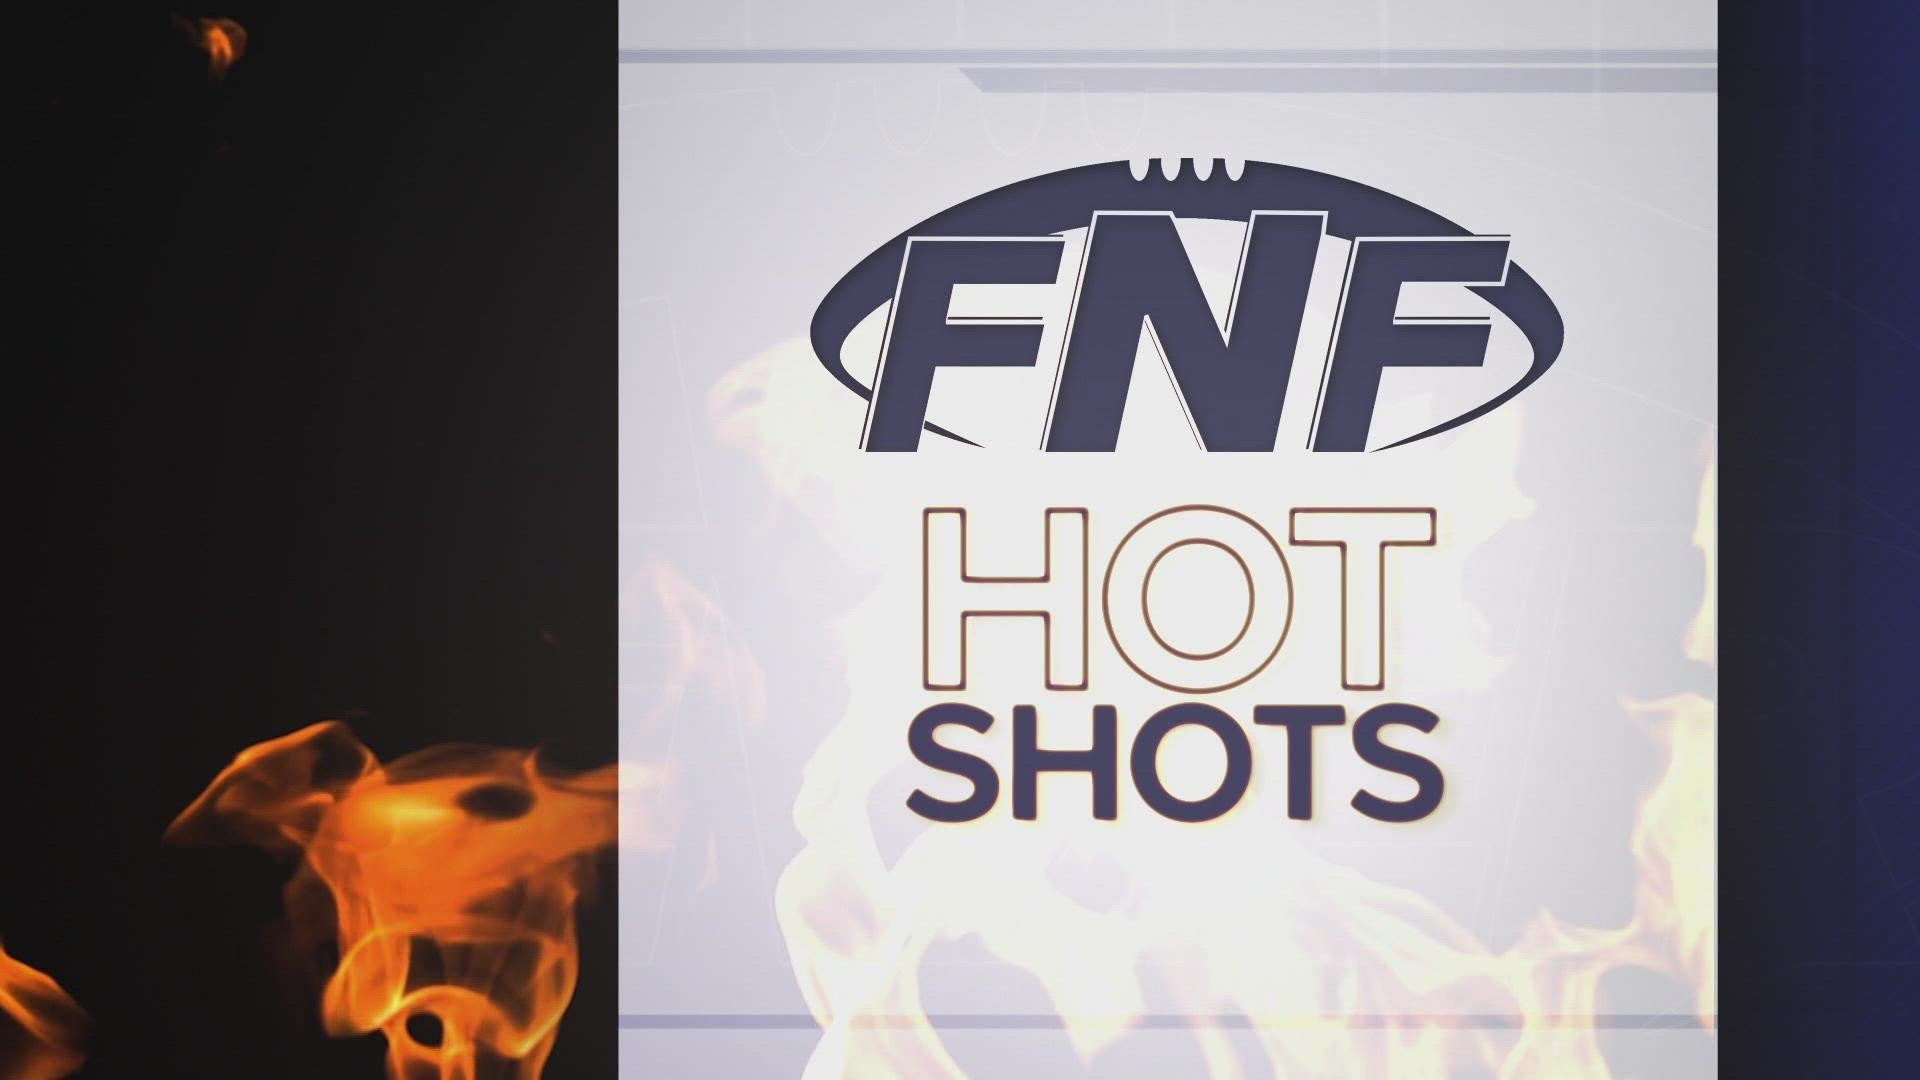 Check out the 3 nominees for Hot Shots Play of the Week!